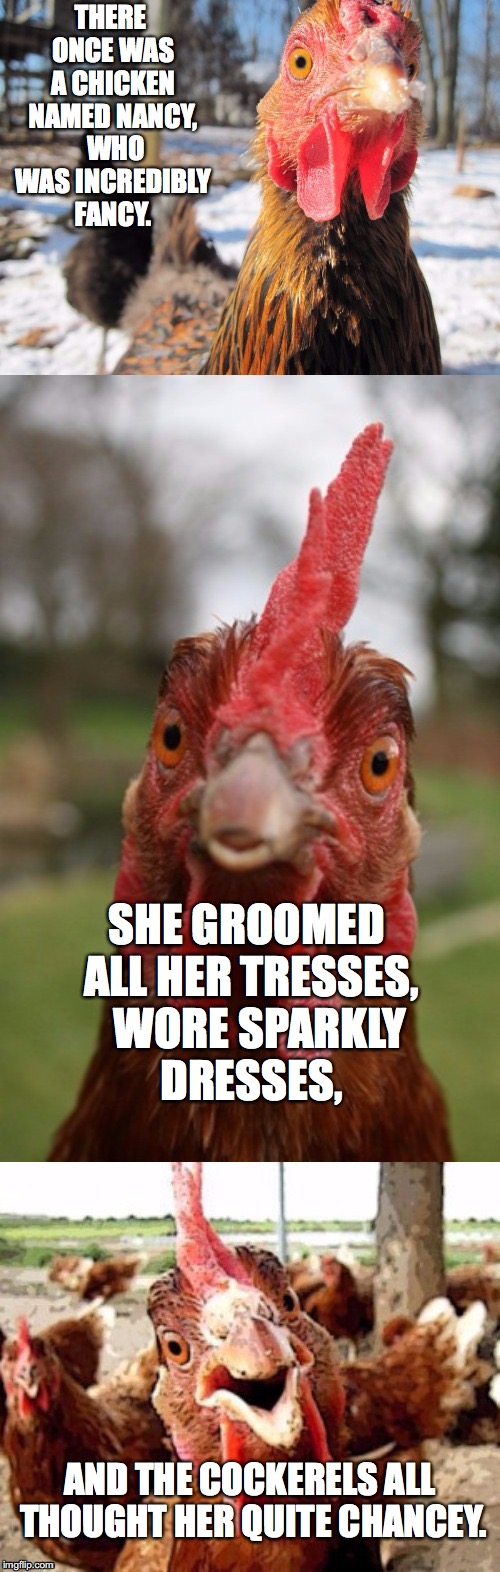 remember limerick week? such fun. | THERE ONCE WAS A CHICKEN NAMED NANCY,  WHO WAS INCREDIBLY FANCY. SHE GROOMED ALL HER TRESSES,  
WORE SPARKLY DRESSES, AND THE COCKERELS ALL THOUGHT HER QUITE CHANCEY. | image tagged in bad pun chicken,chicken,chicken week | made w/ Imgflip meme maker